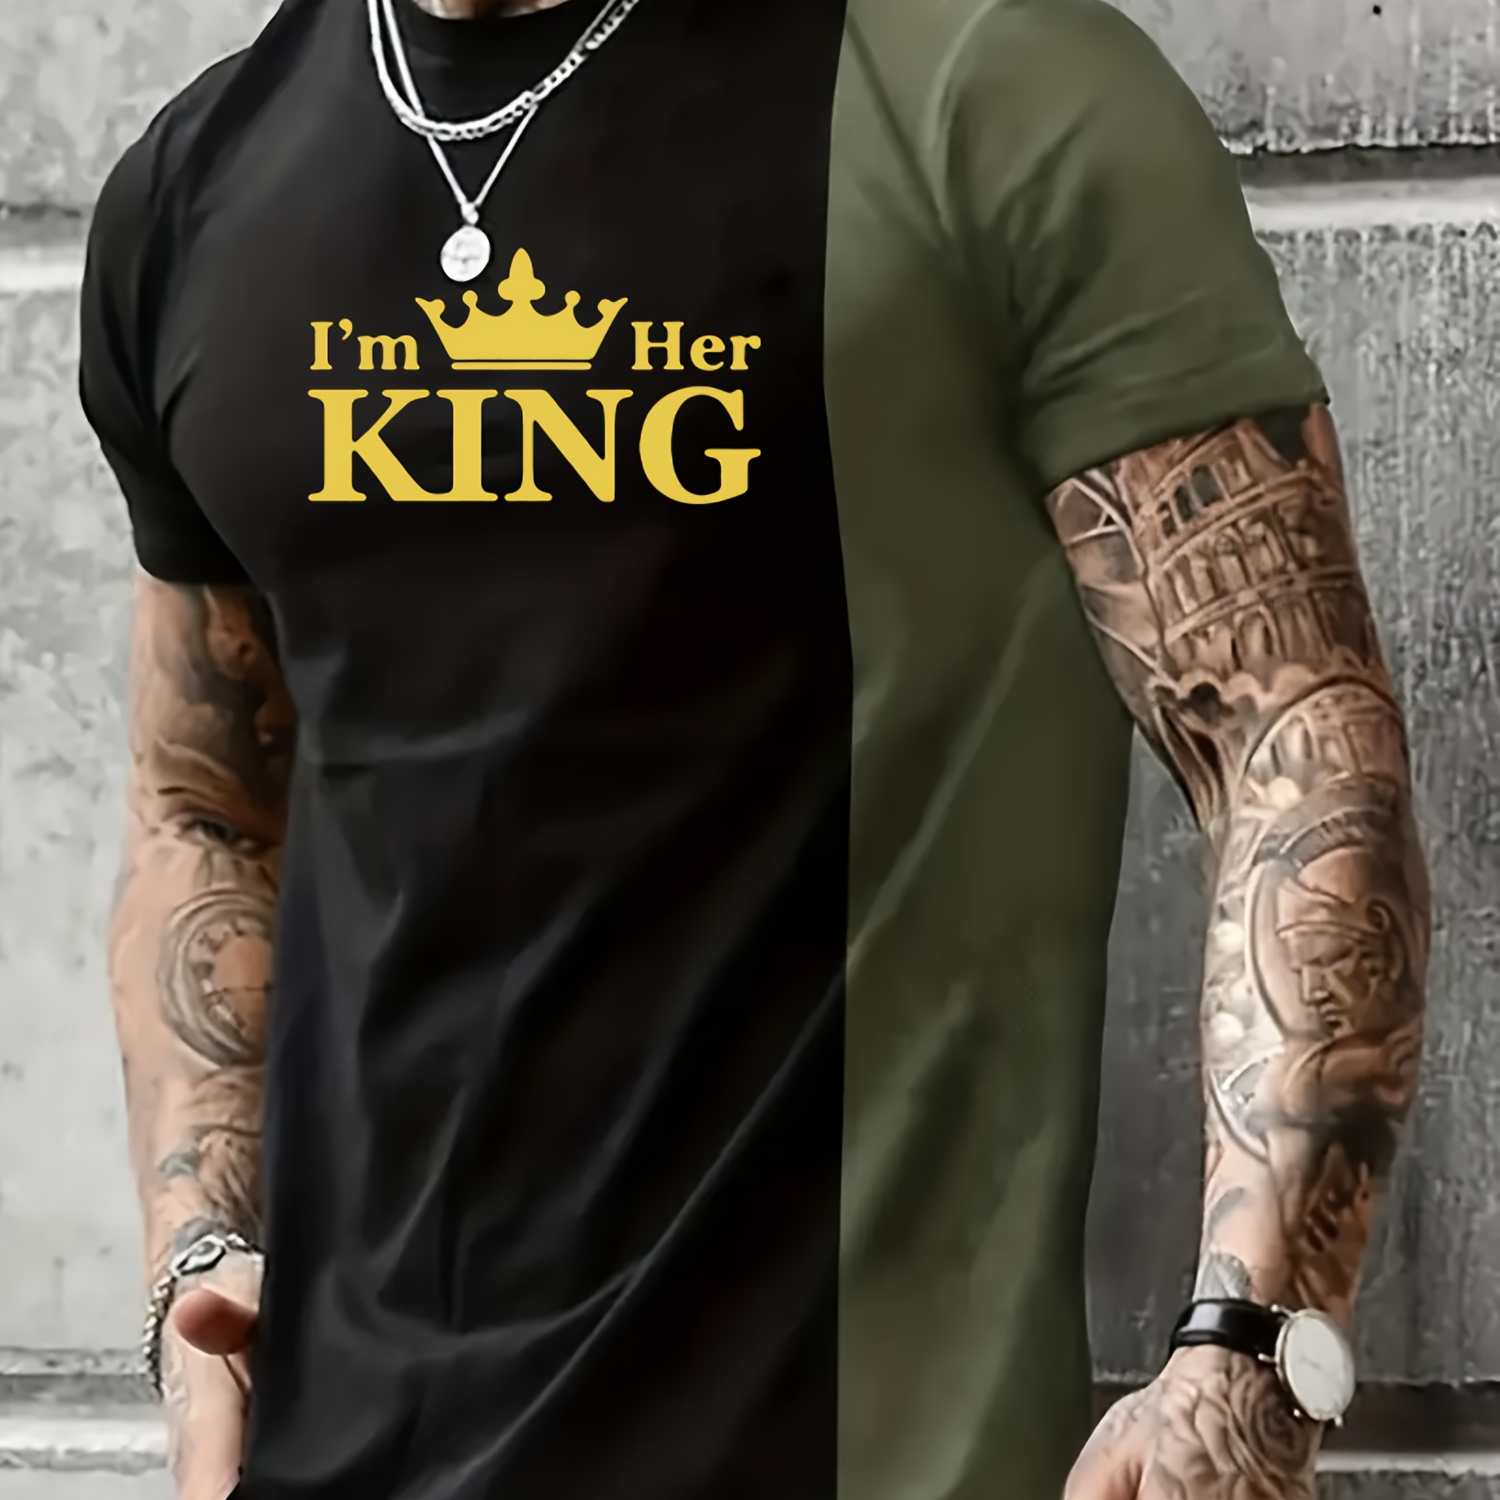 

'i'm Her King' Crown Print T Shirt, Tees For Men, Casual Short Sleeve Tshirt For Summer Spring Fall, Tops As Gifts